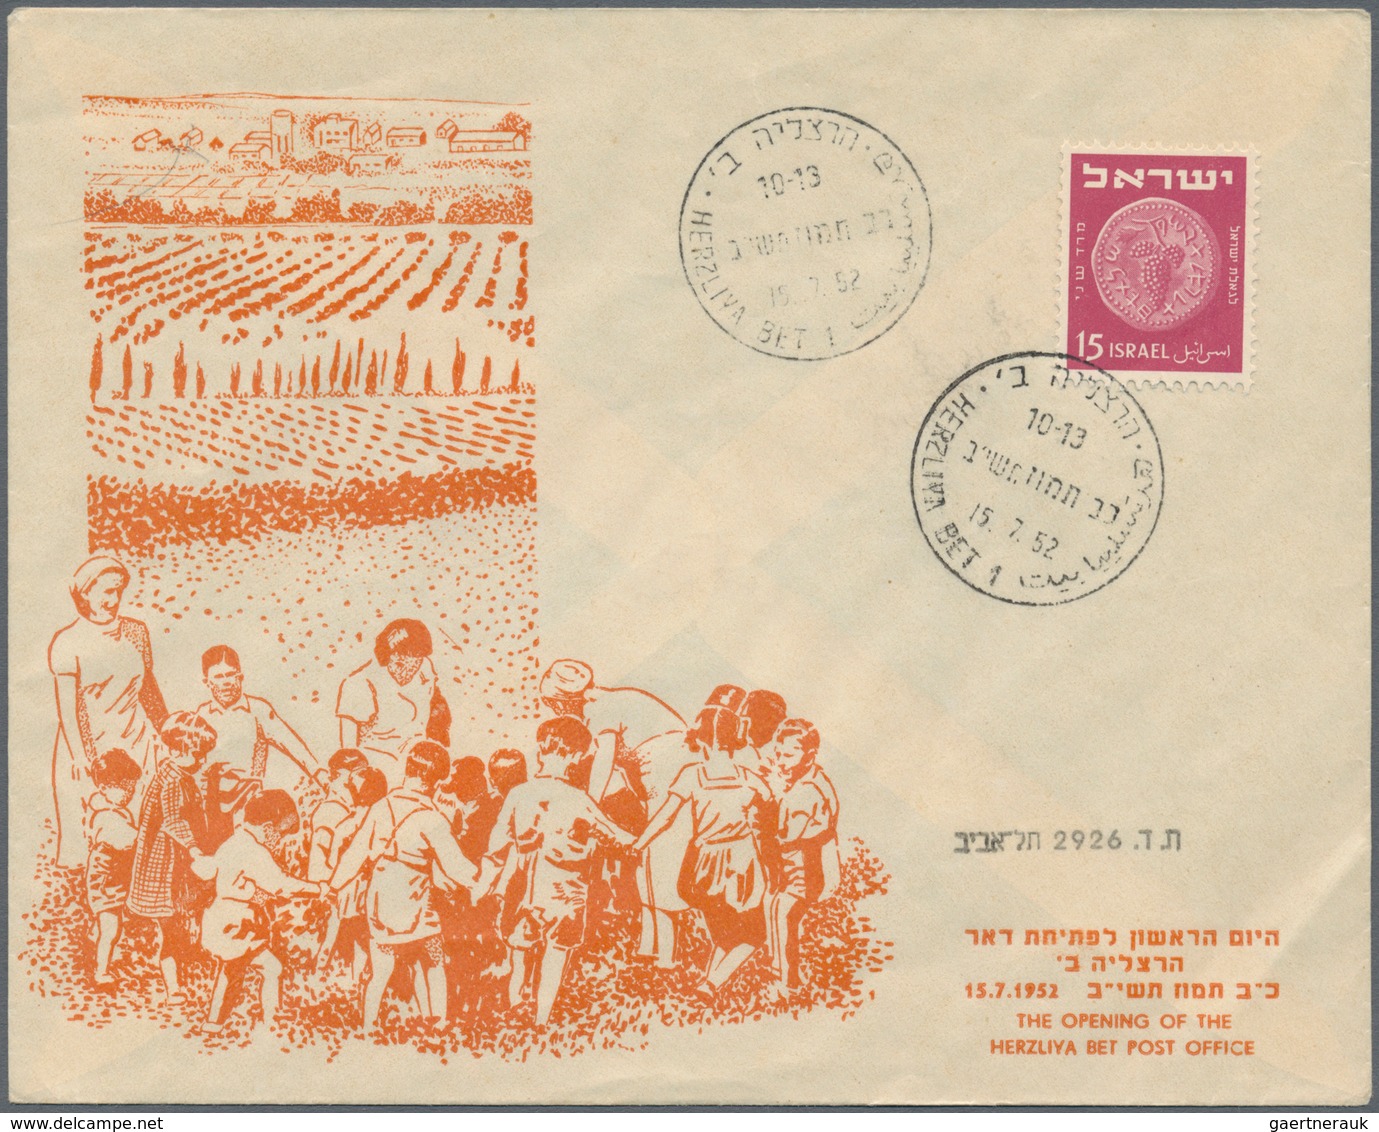 Israel: 1949/1957, POST OFFICE OPENING, assortment of apprx. 216 commemorative covers (cacheted enve